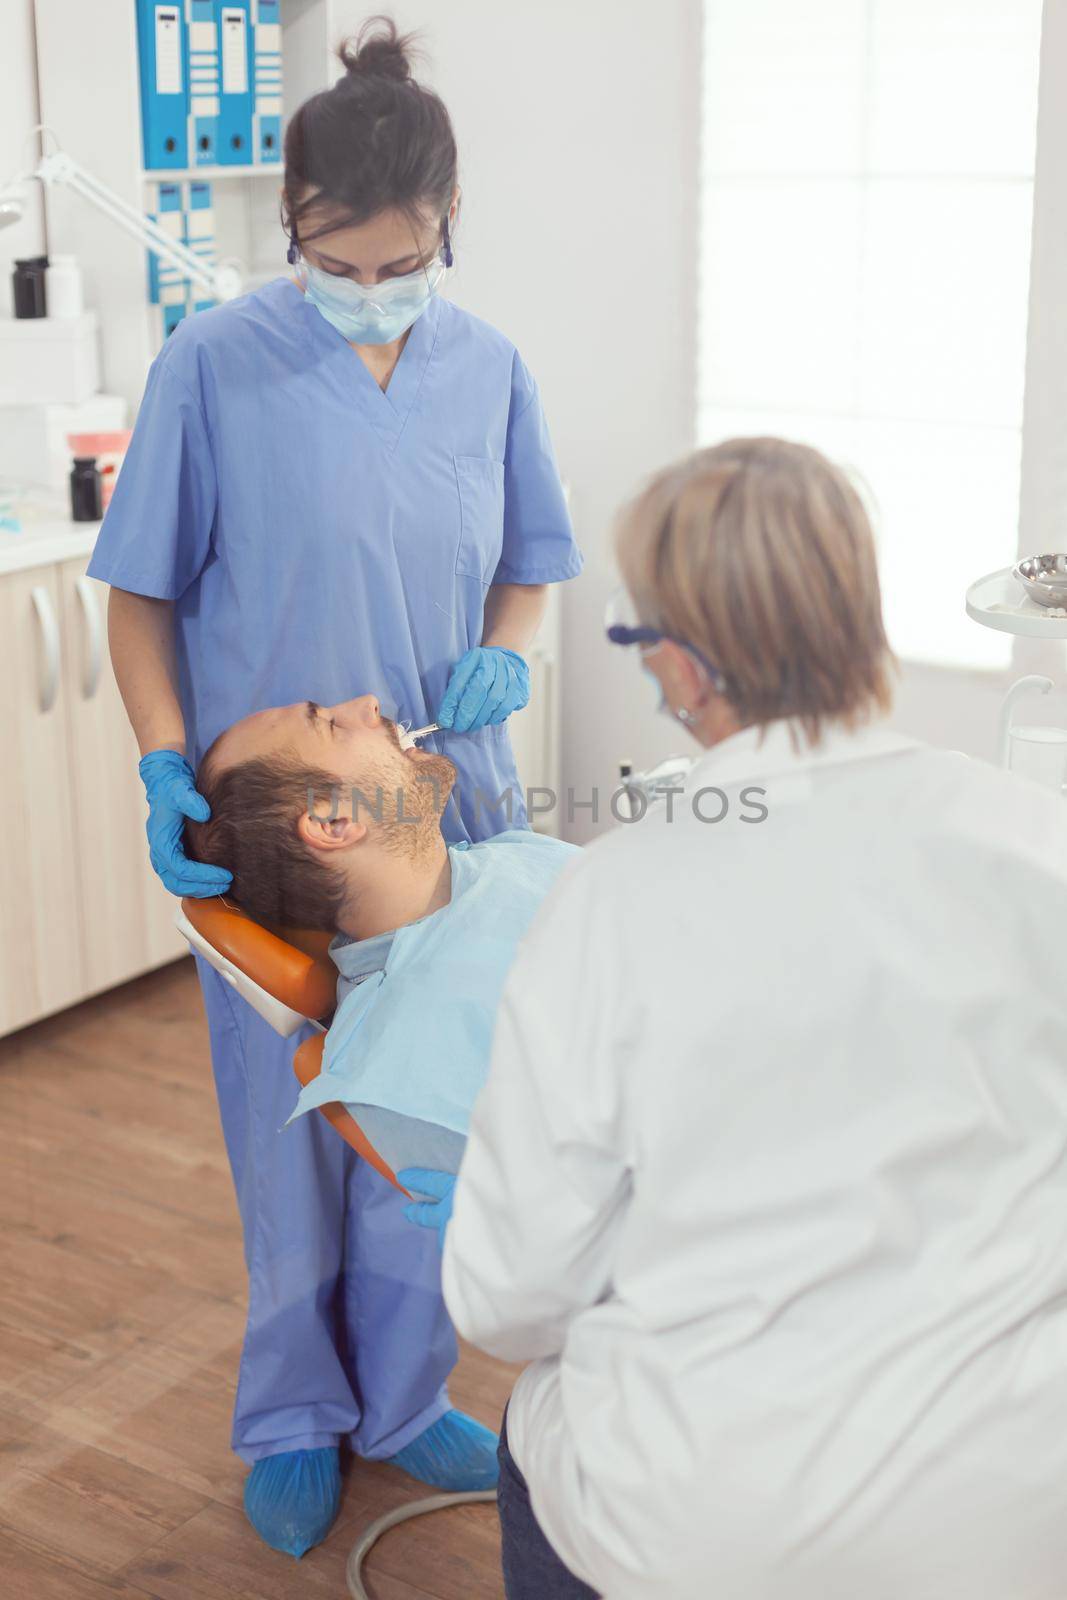 Sick patient lying on dental chair with open mouth for medical procedure, senior stomatologist analyzing health teeth. Dentist dentist and medical nurse removes tooth during stomatological visit